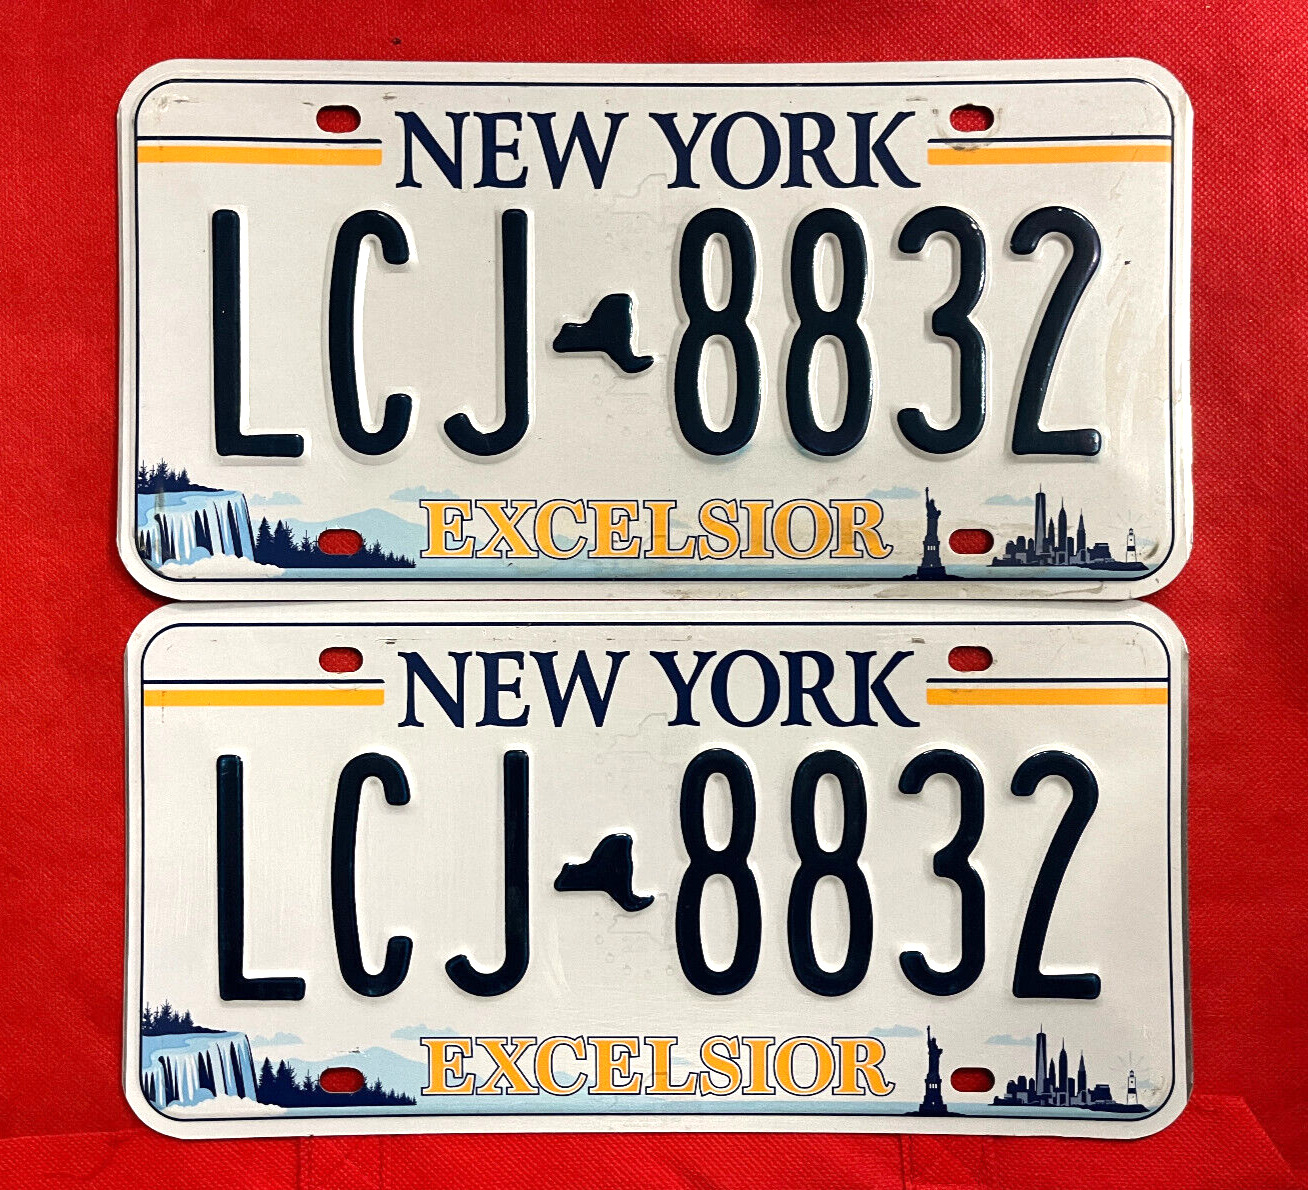 New York License Plate Pair LCJ 8832 .... Expired / Crafts / Collect / Specialty